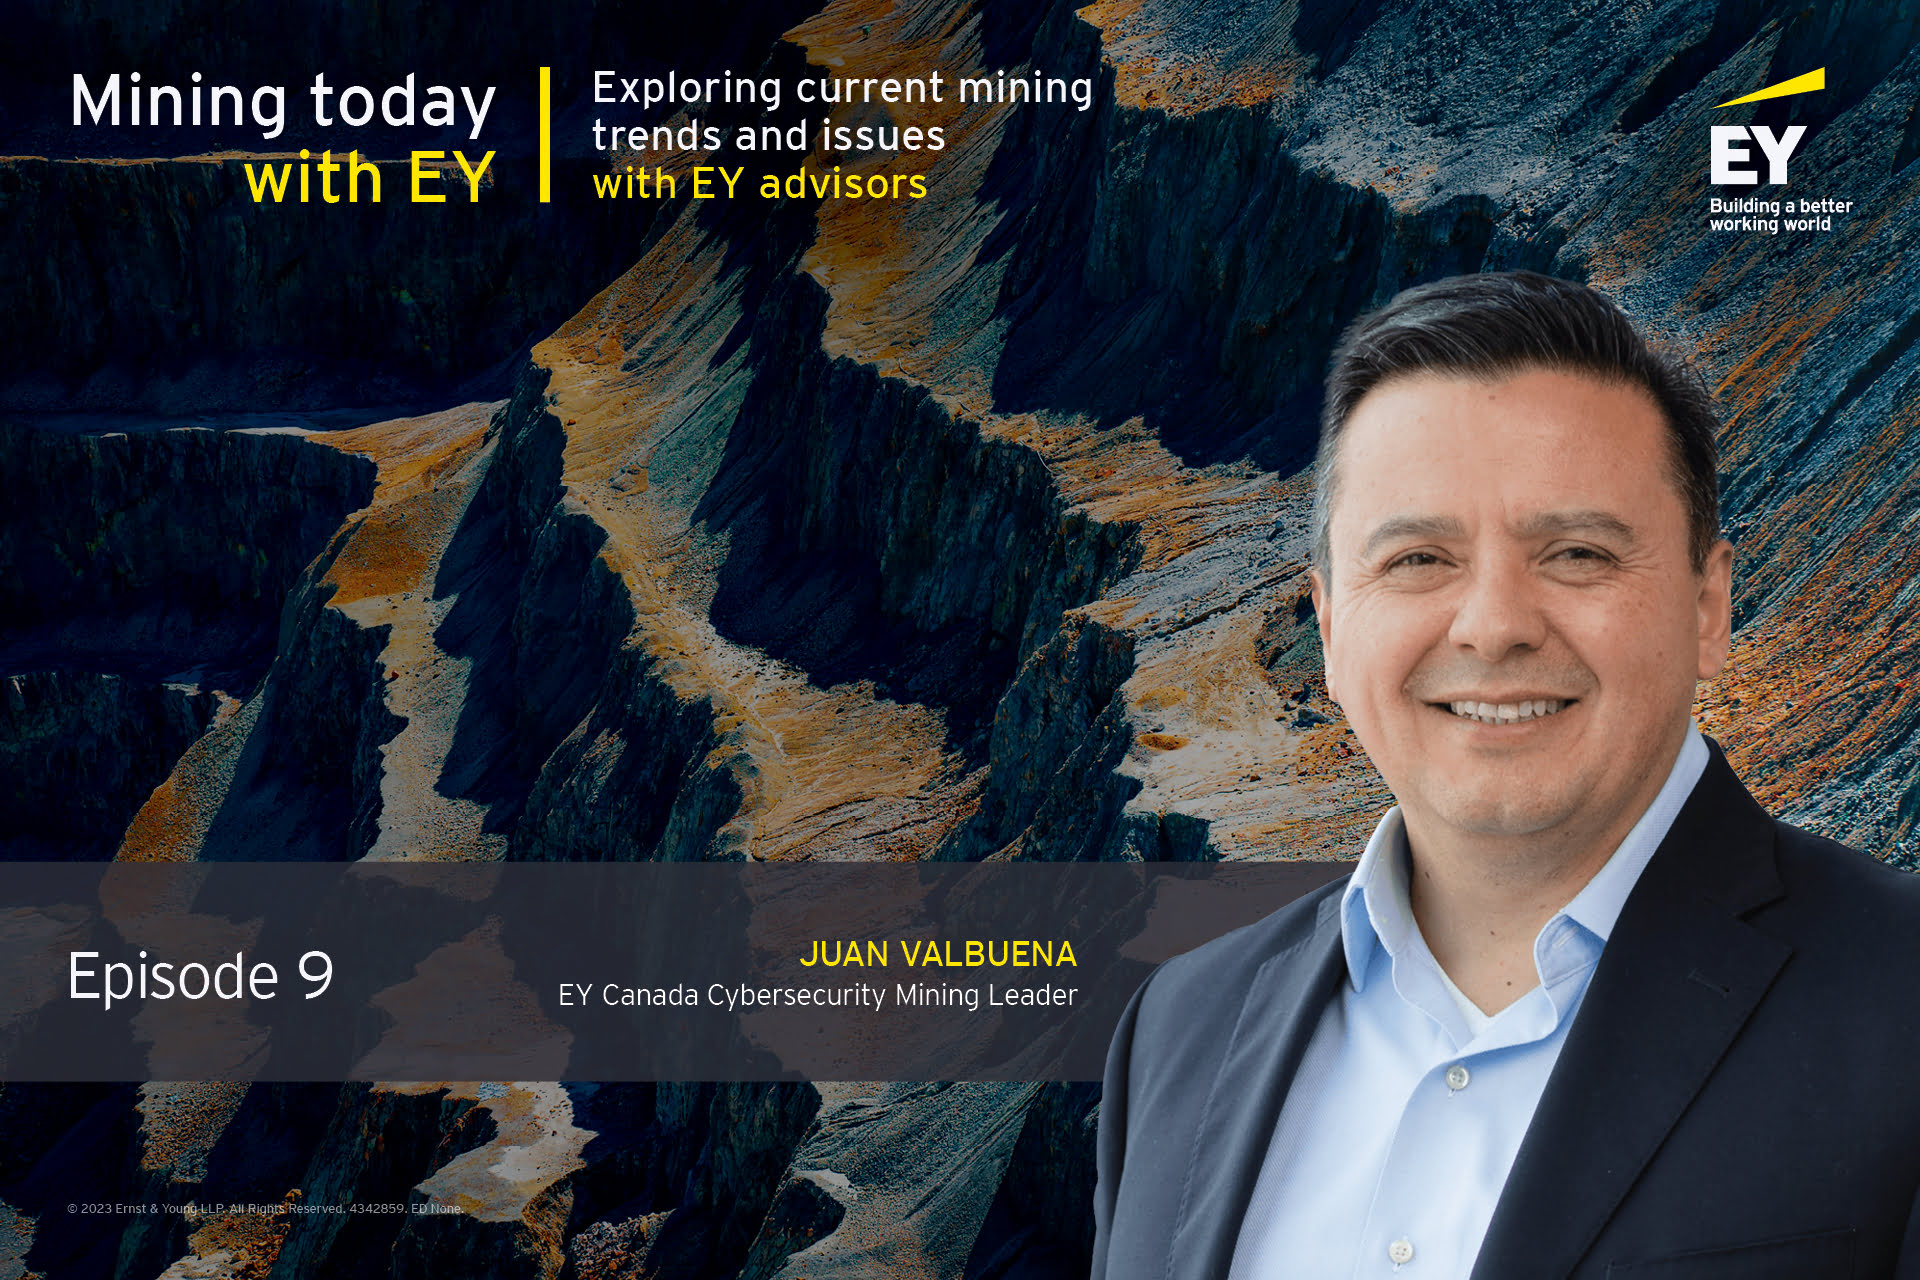 Mining today with EY – EP 9: Cybersecurity key trends and best practices to manage cyber risk in mining and metals